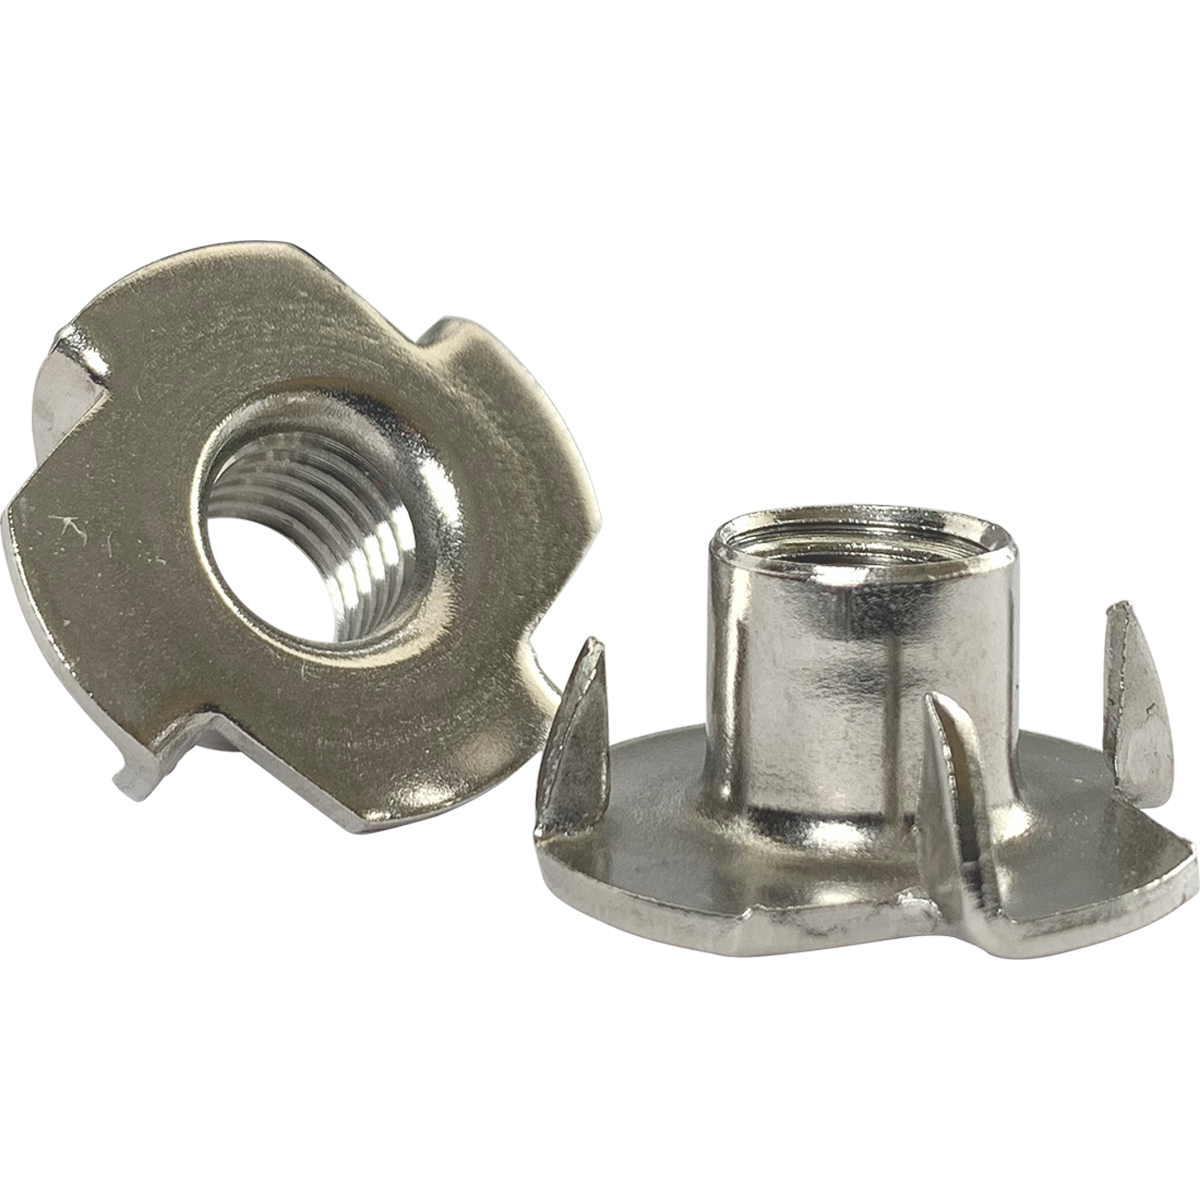 Great prices on T Nuts, which are also known 4-pronged t-nuts, or tee nuts, are available in various diameters and at competitive prices